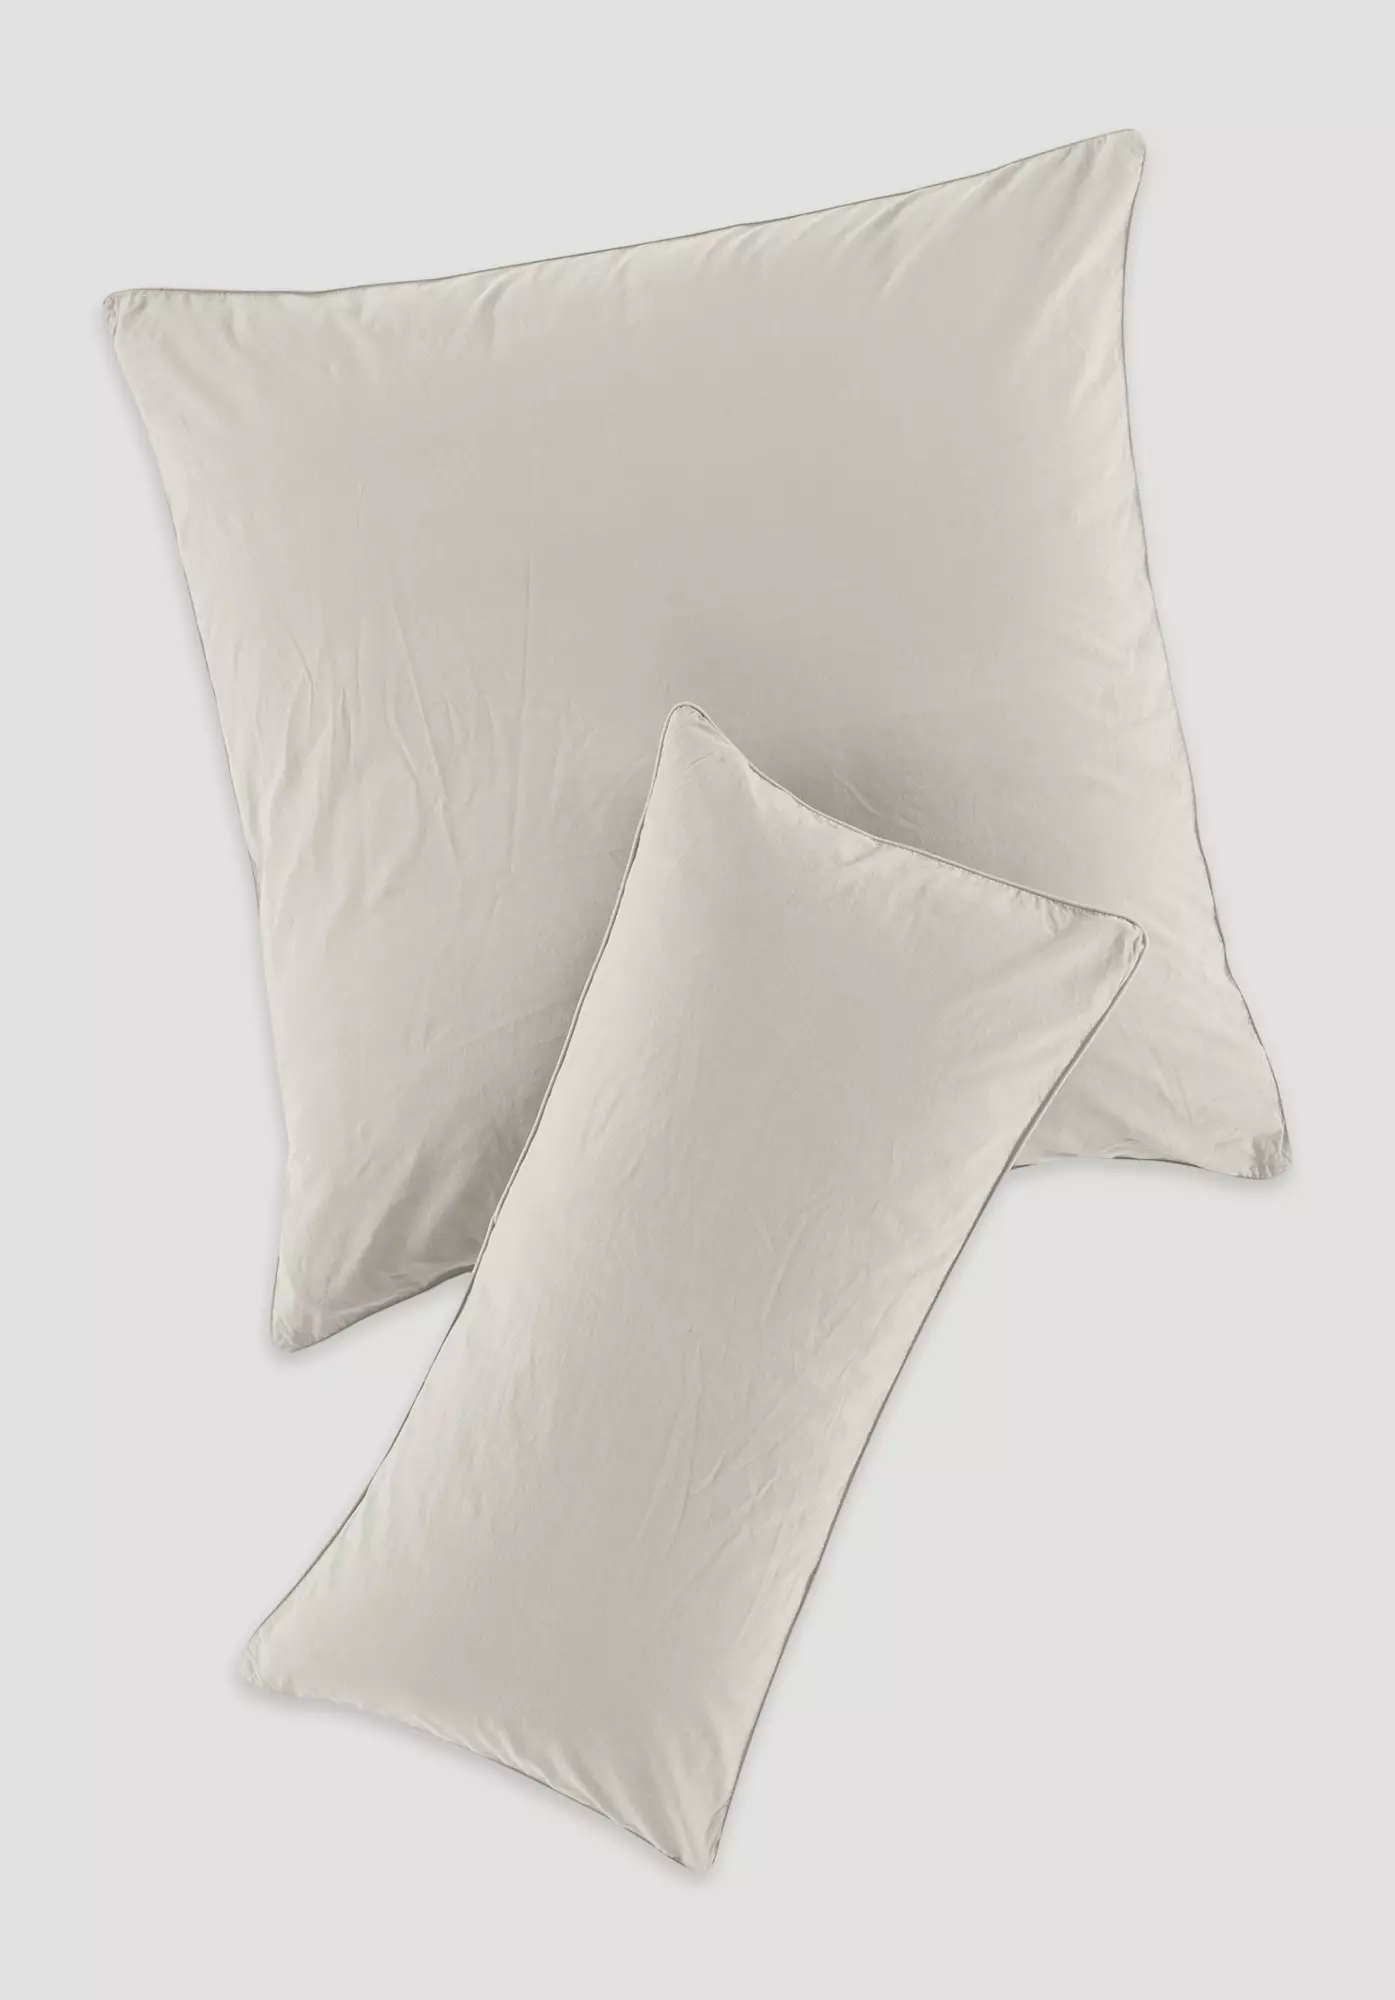 Percale cushion cover made from pure organic cotton - 0